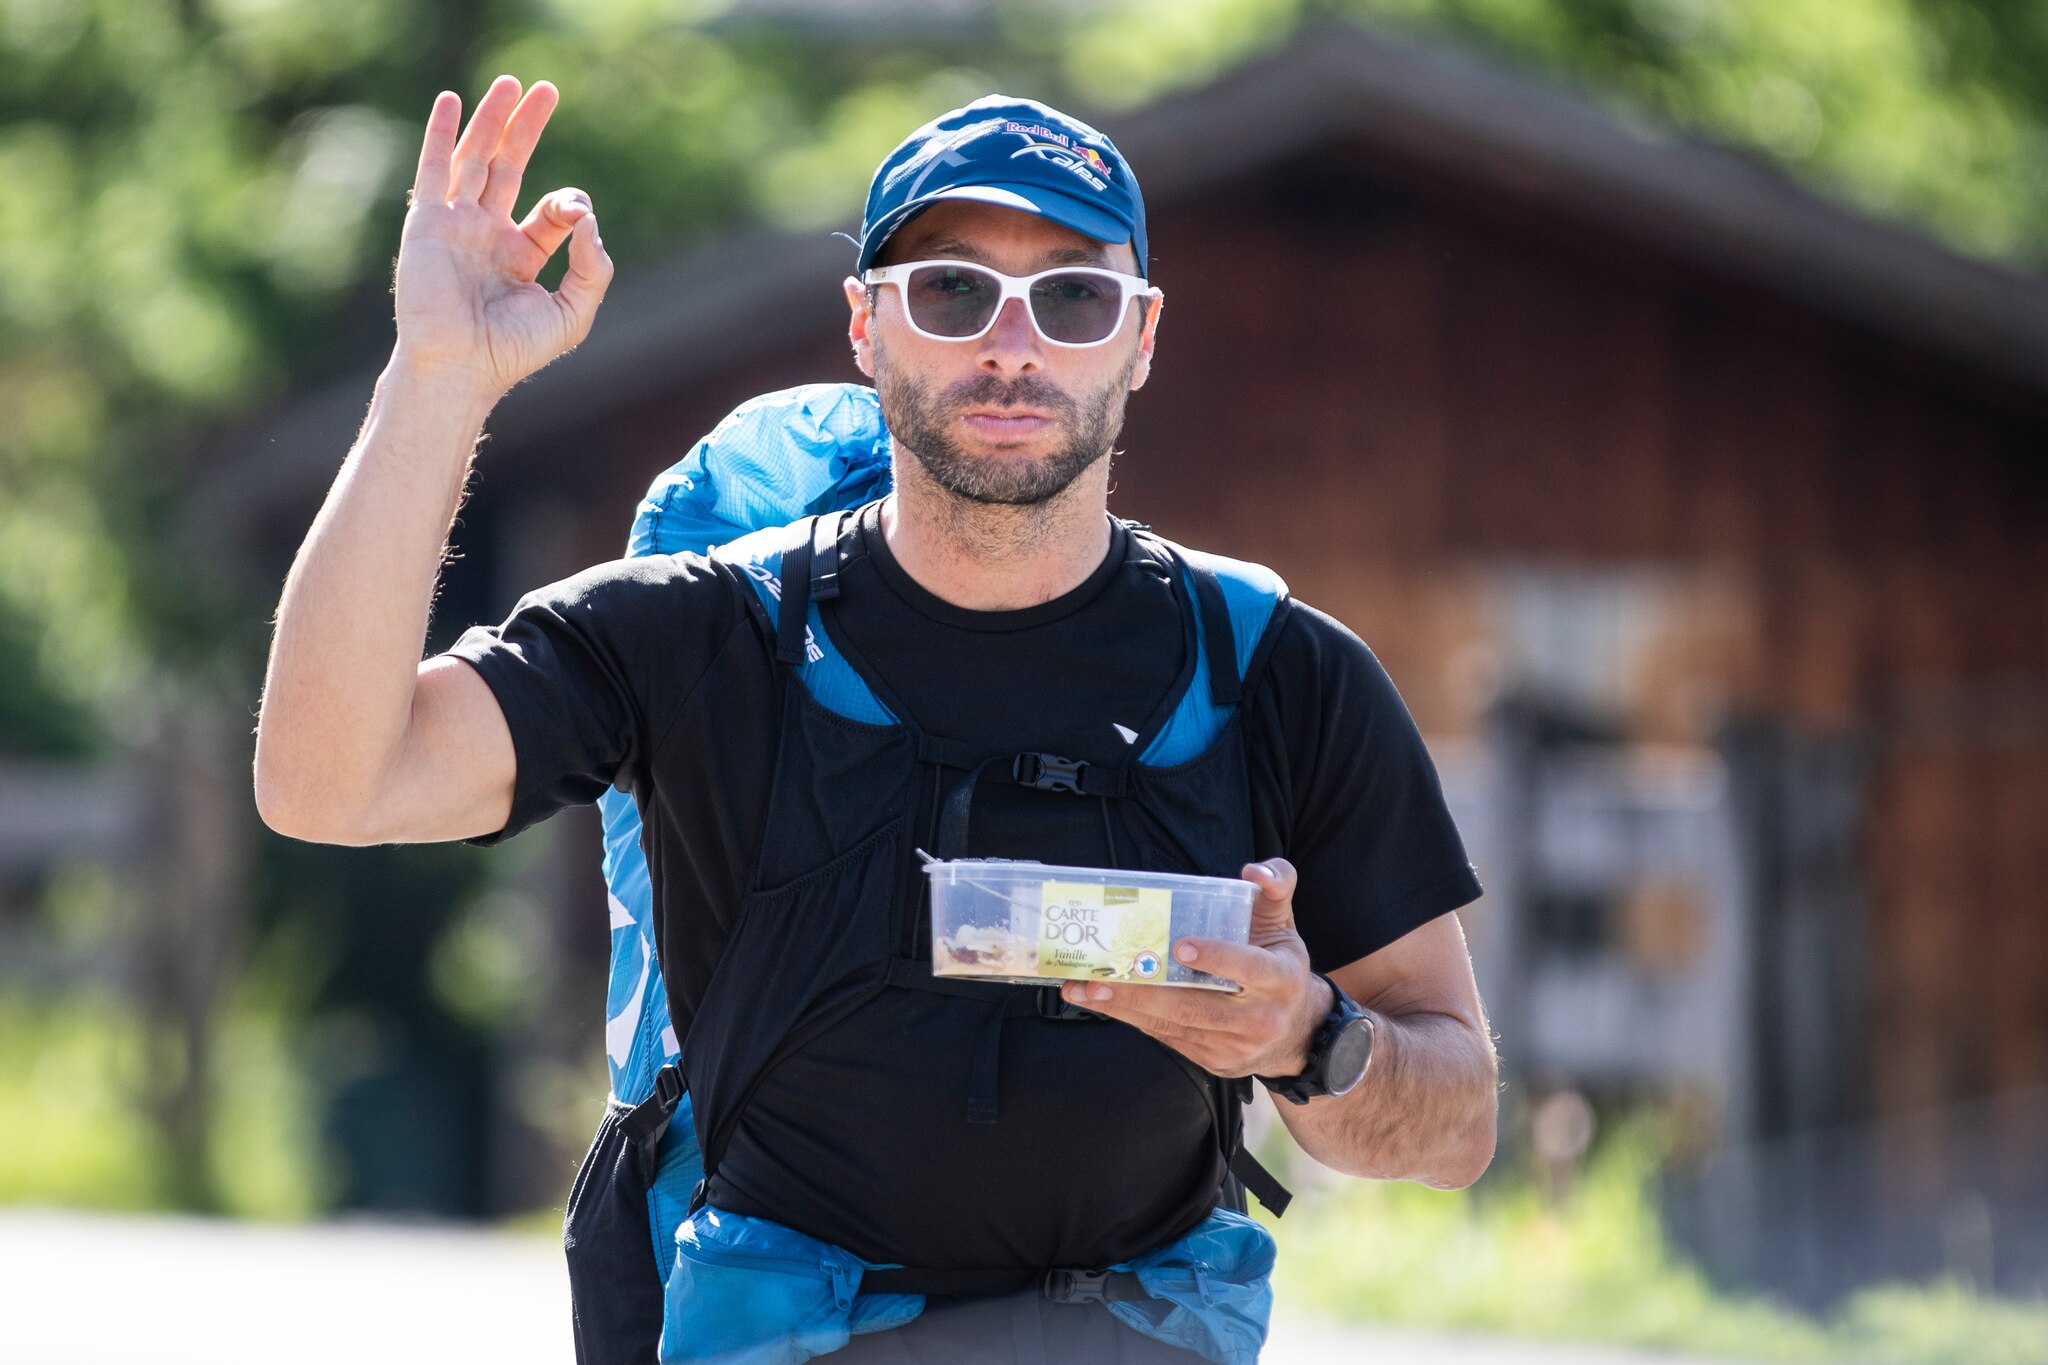 Gaspard Petiot (FRA2) seen during the Red Bull X-Alps in Lermoos, Austria on June 19, 2019